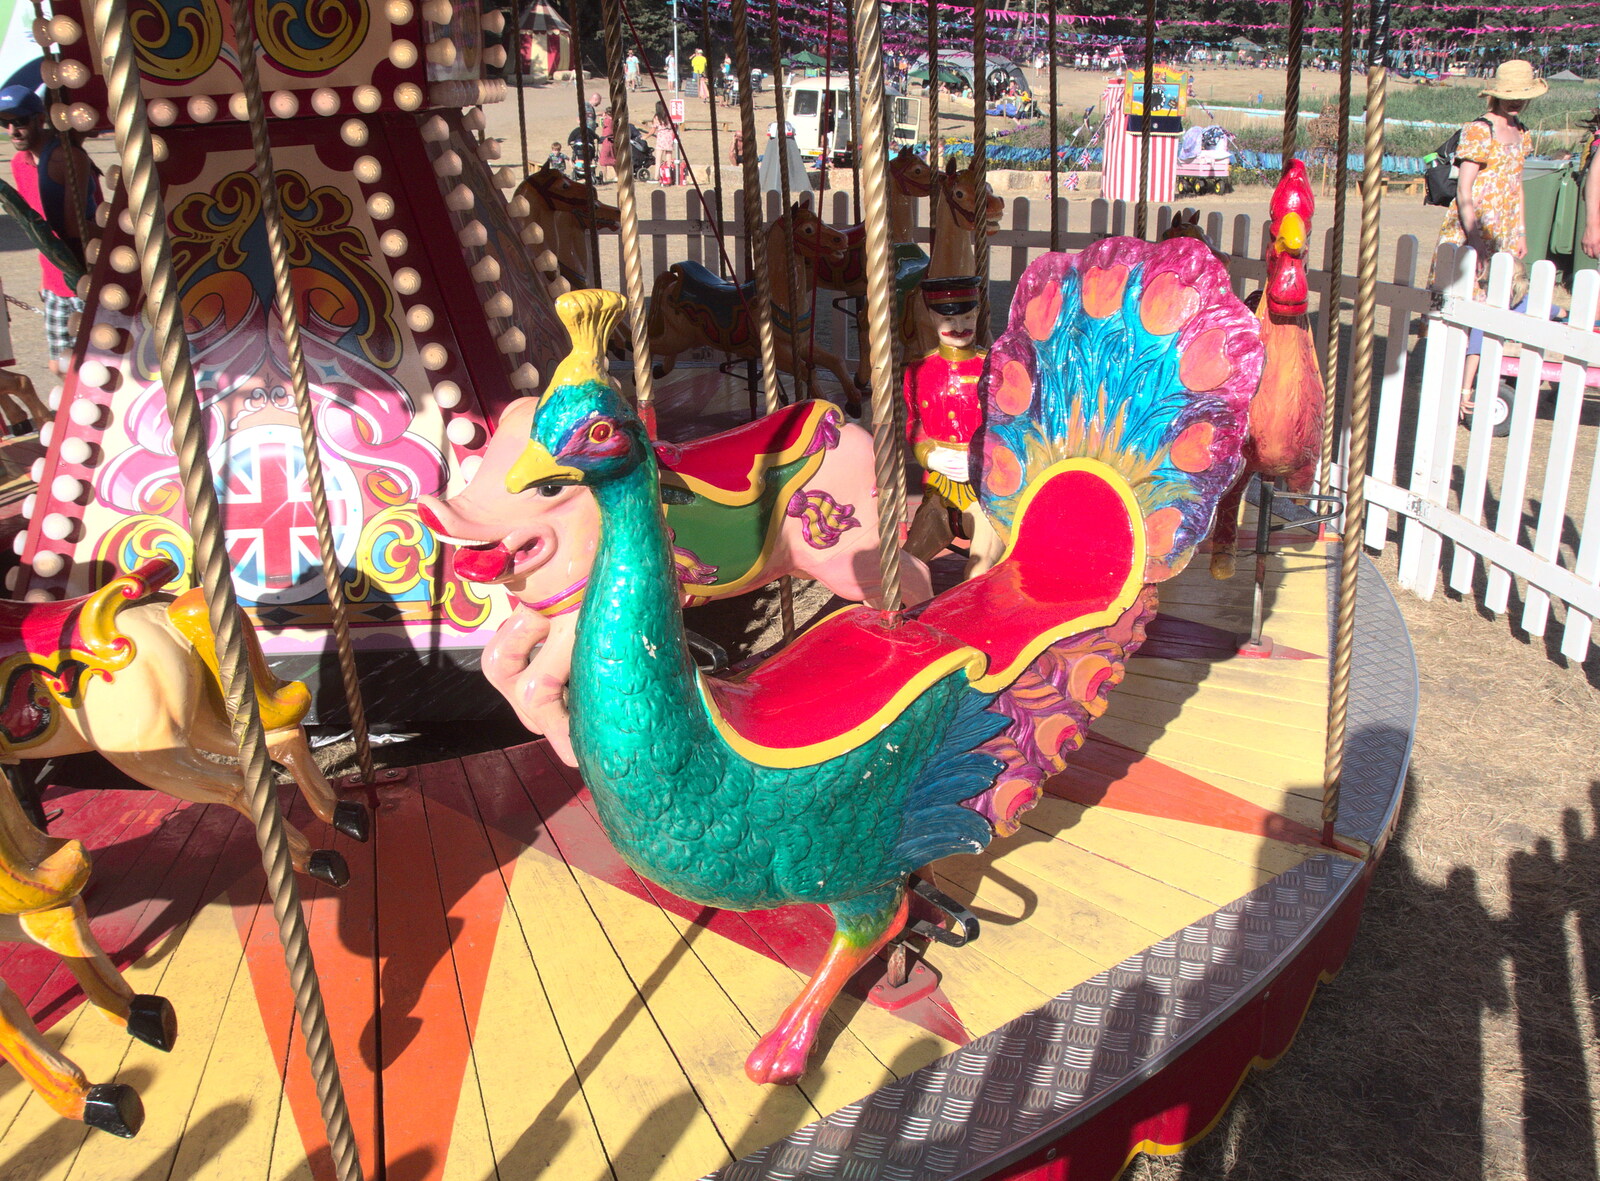 A Day at Latitude, Henham Park, Suffolk - 24th July 2022: A brightly-coloured bird on the carousel